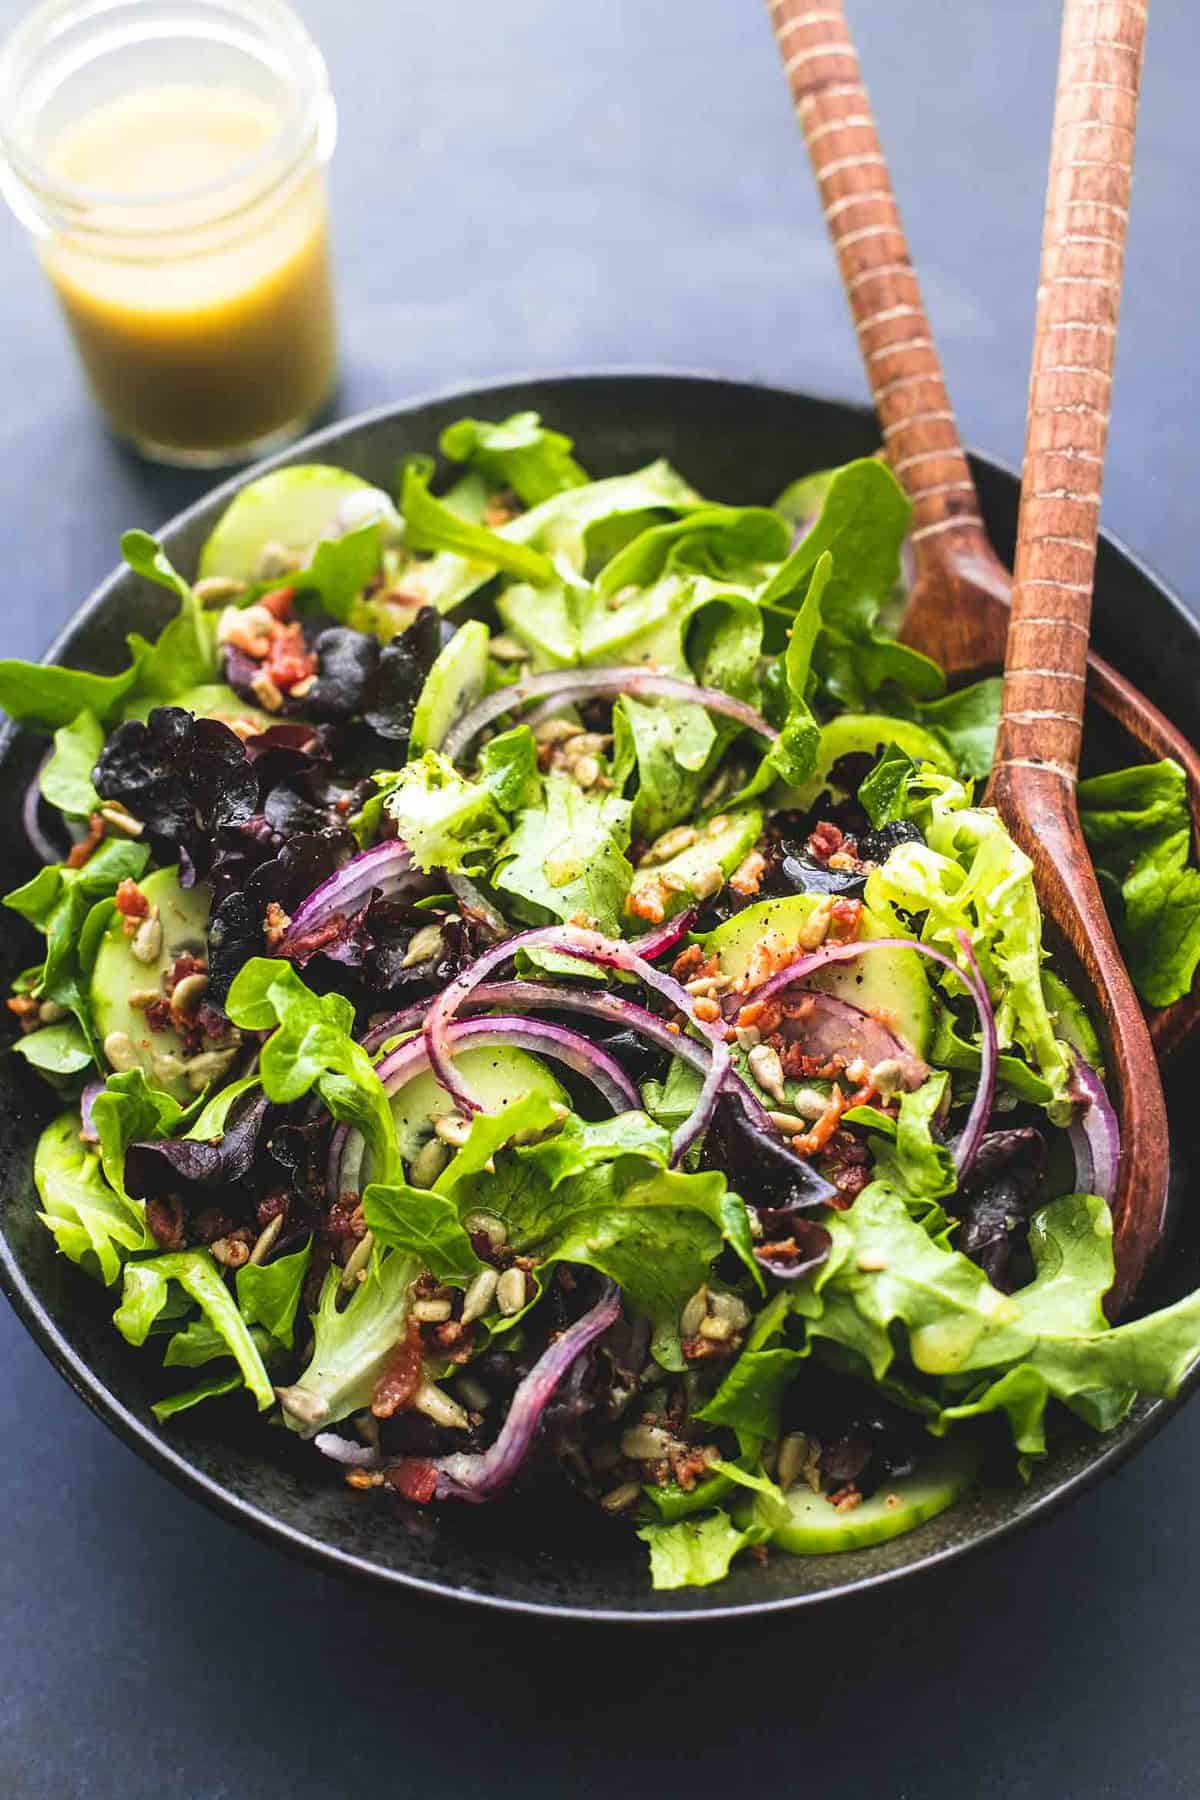 Salad Greens: Our Favorite Types & How To Use Them